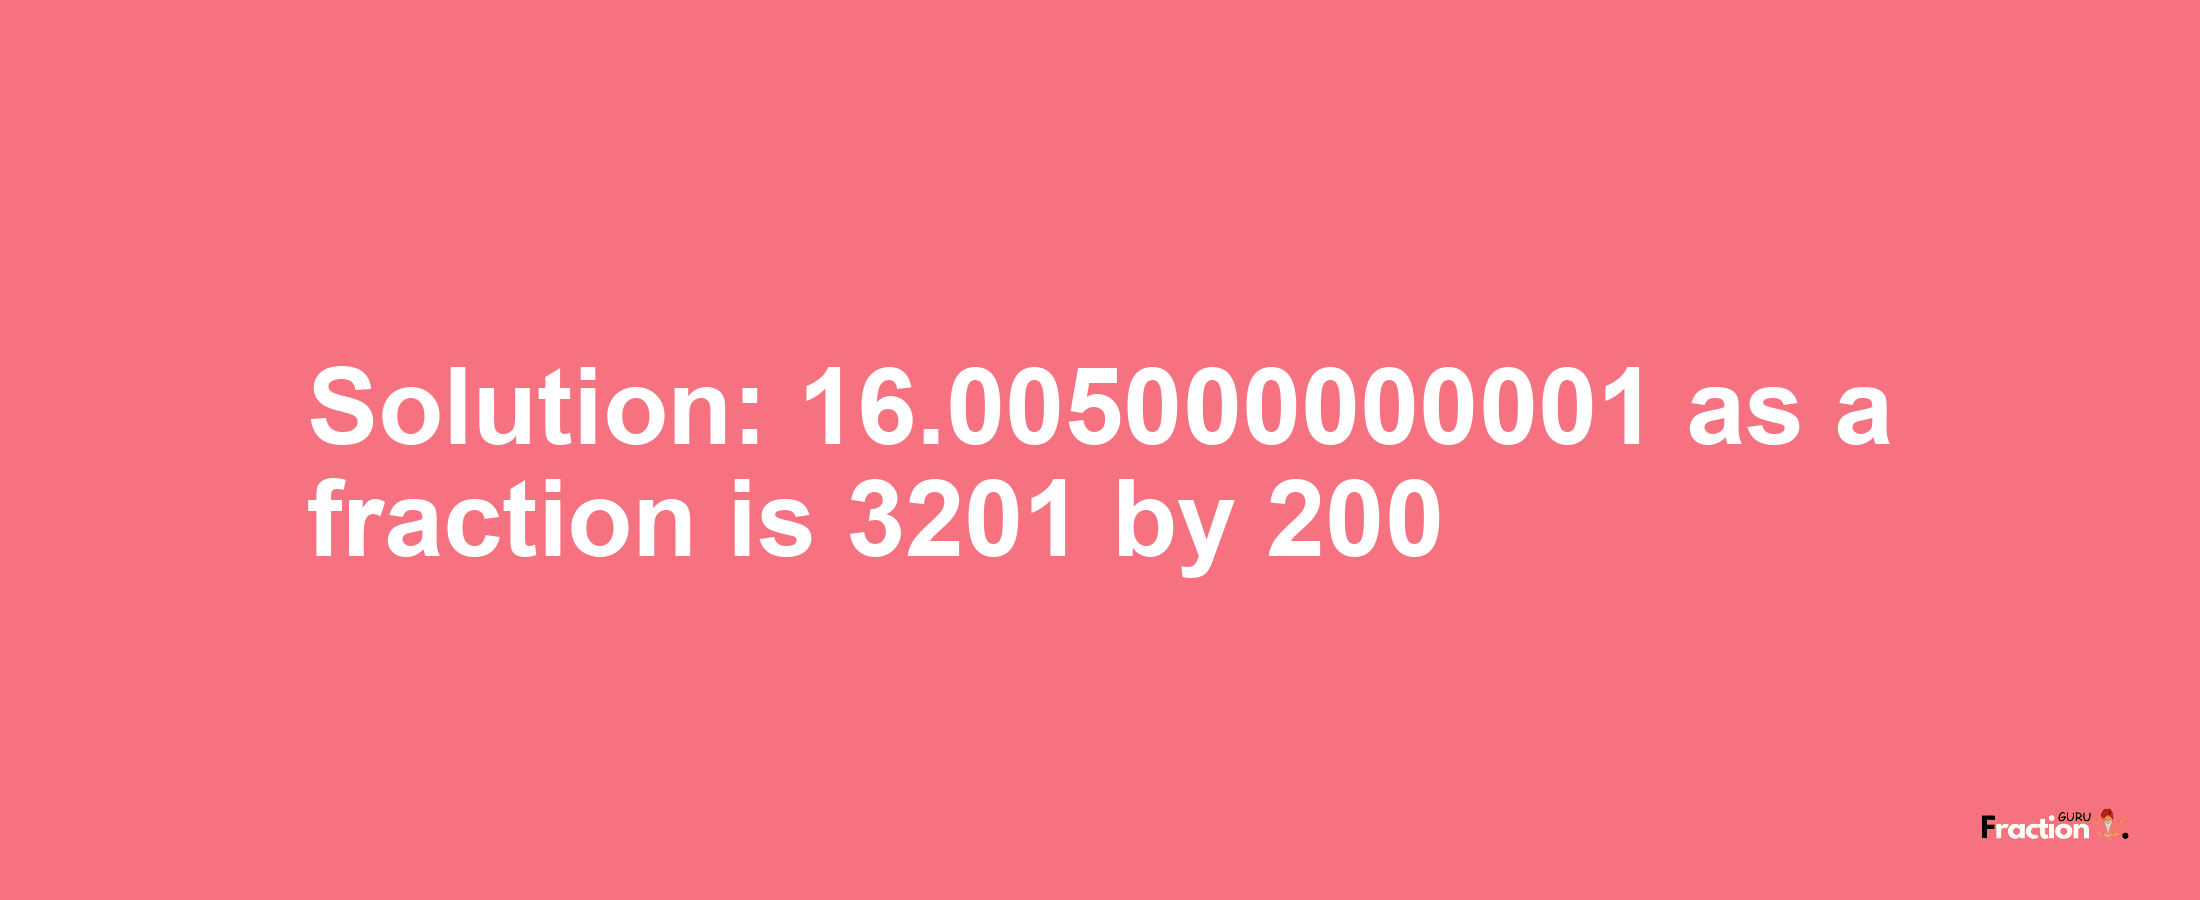 Solution:16.005000000001 as a fraction is 3201/200